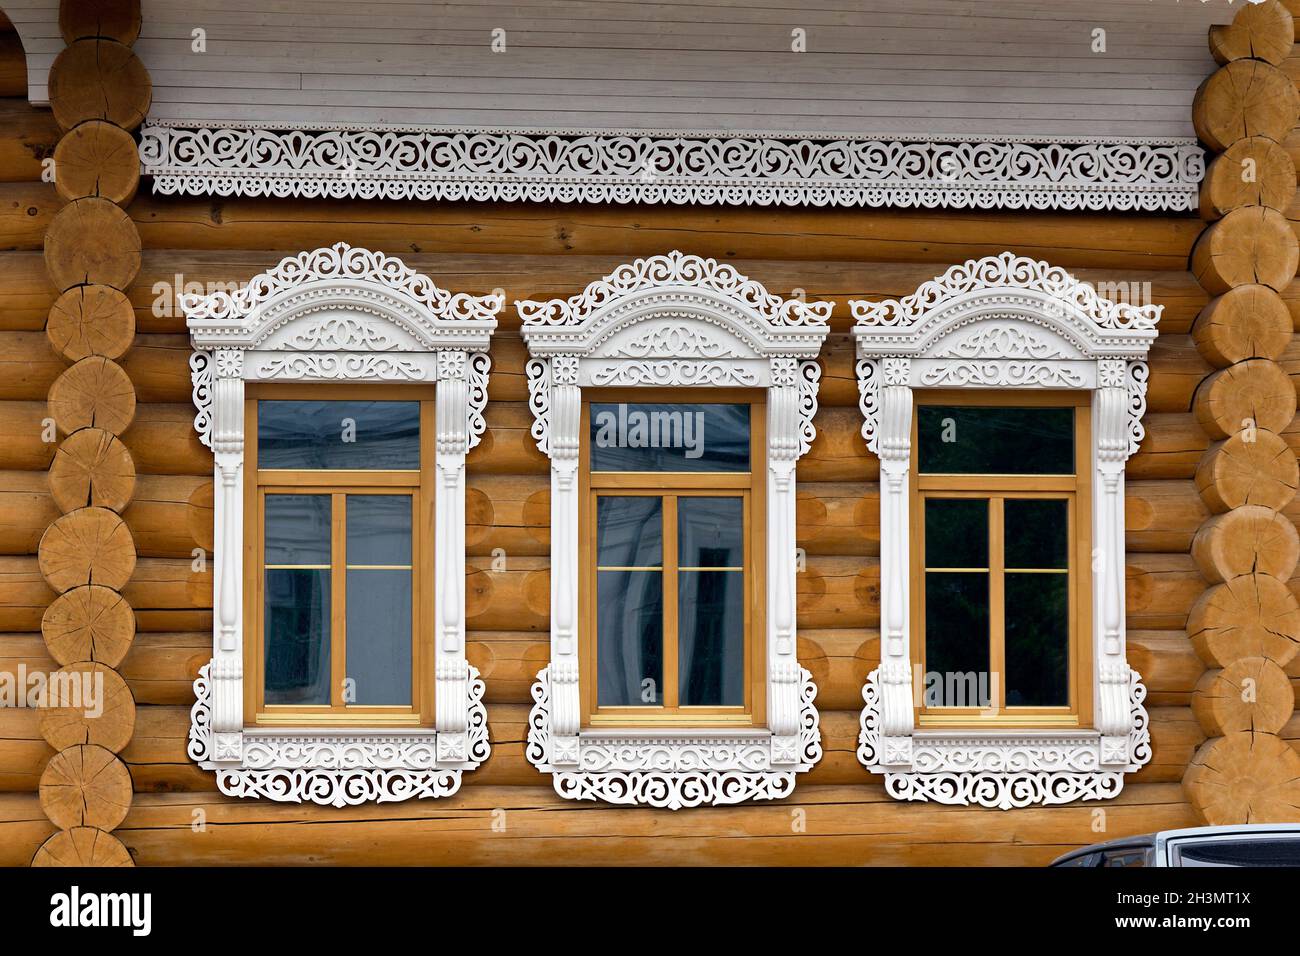 This is architectural fragment of wooden house in Vologda with carved patterns window decorations and cornices. Stock Photo